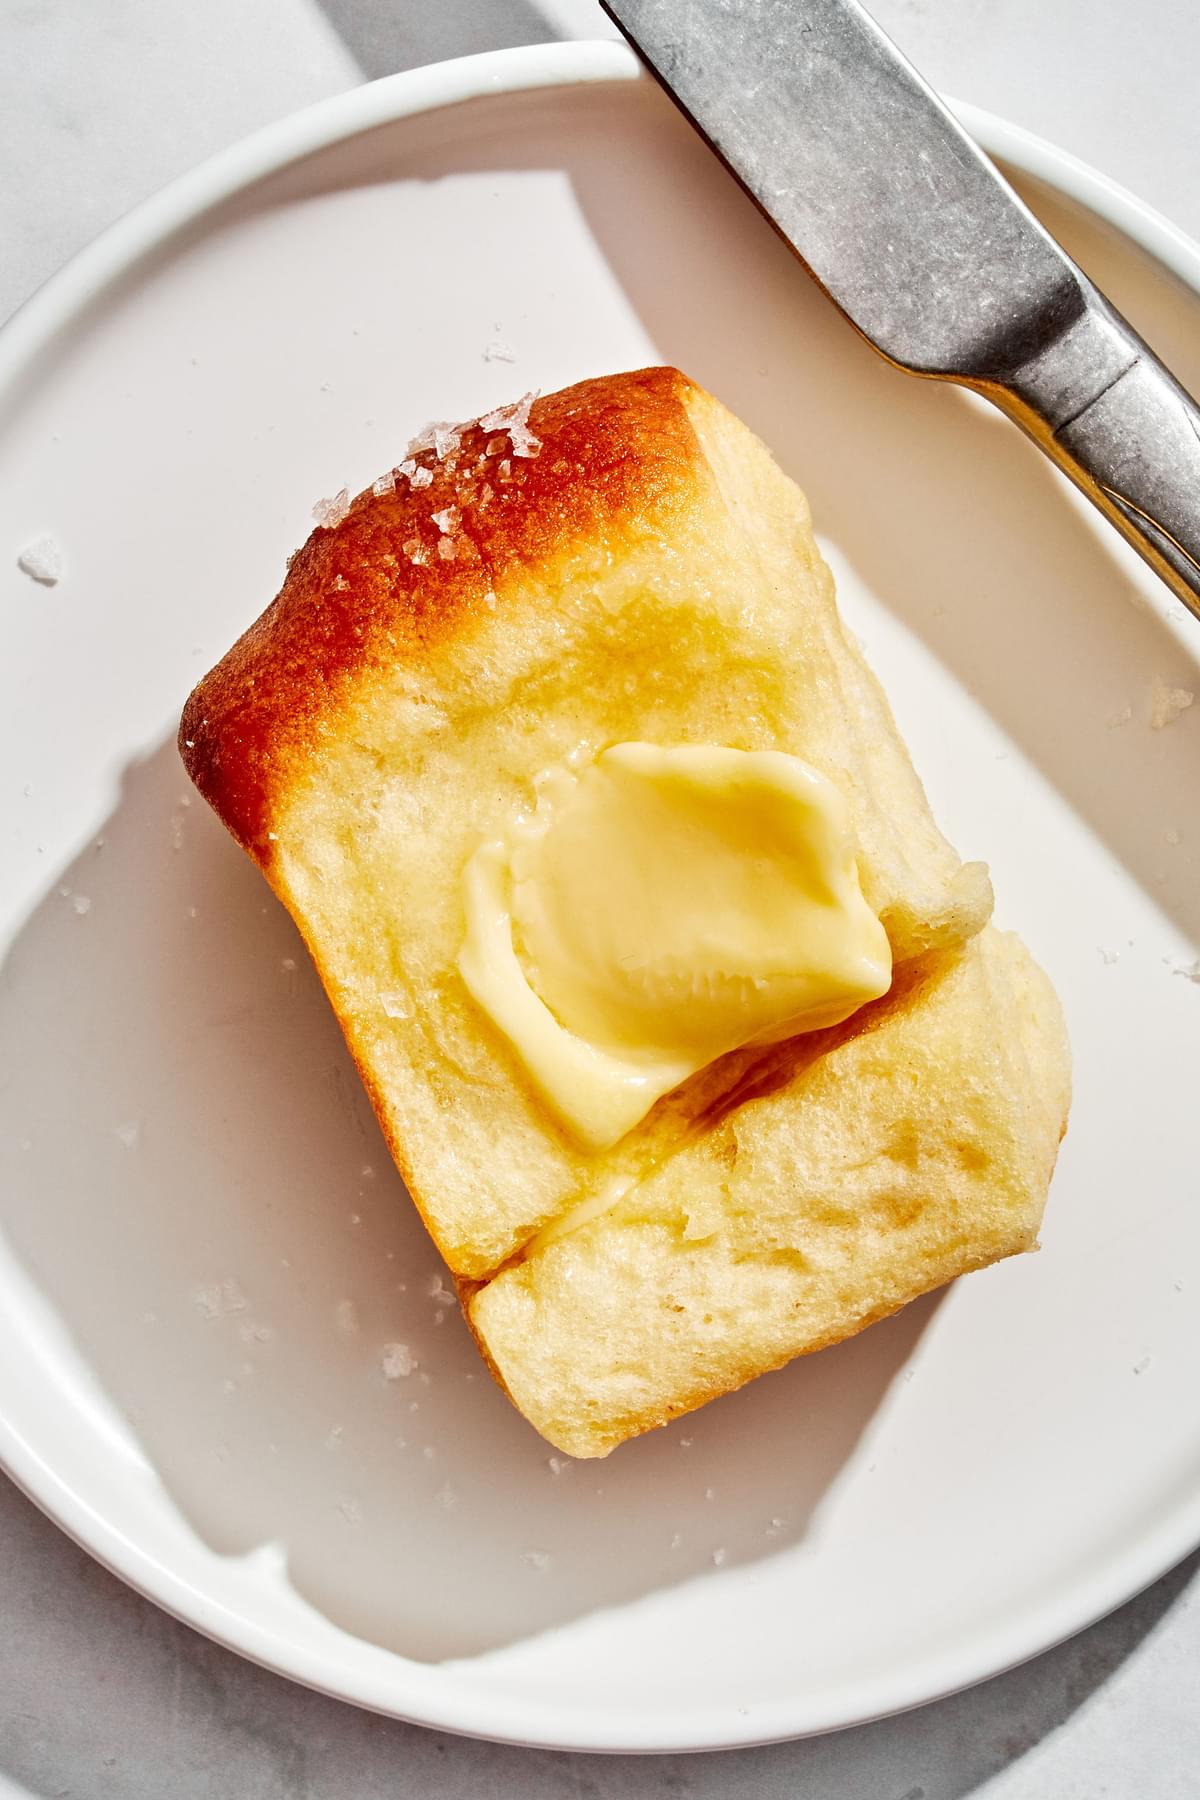 butter spread onto a parker house roll sitting on a plate